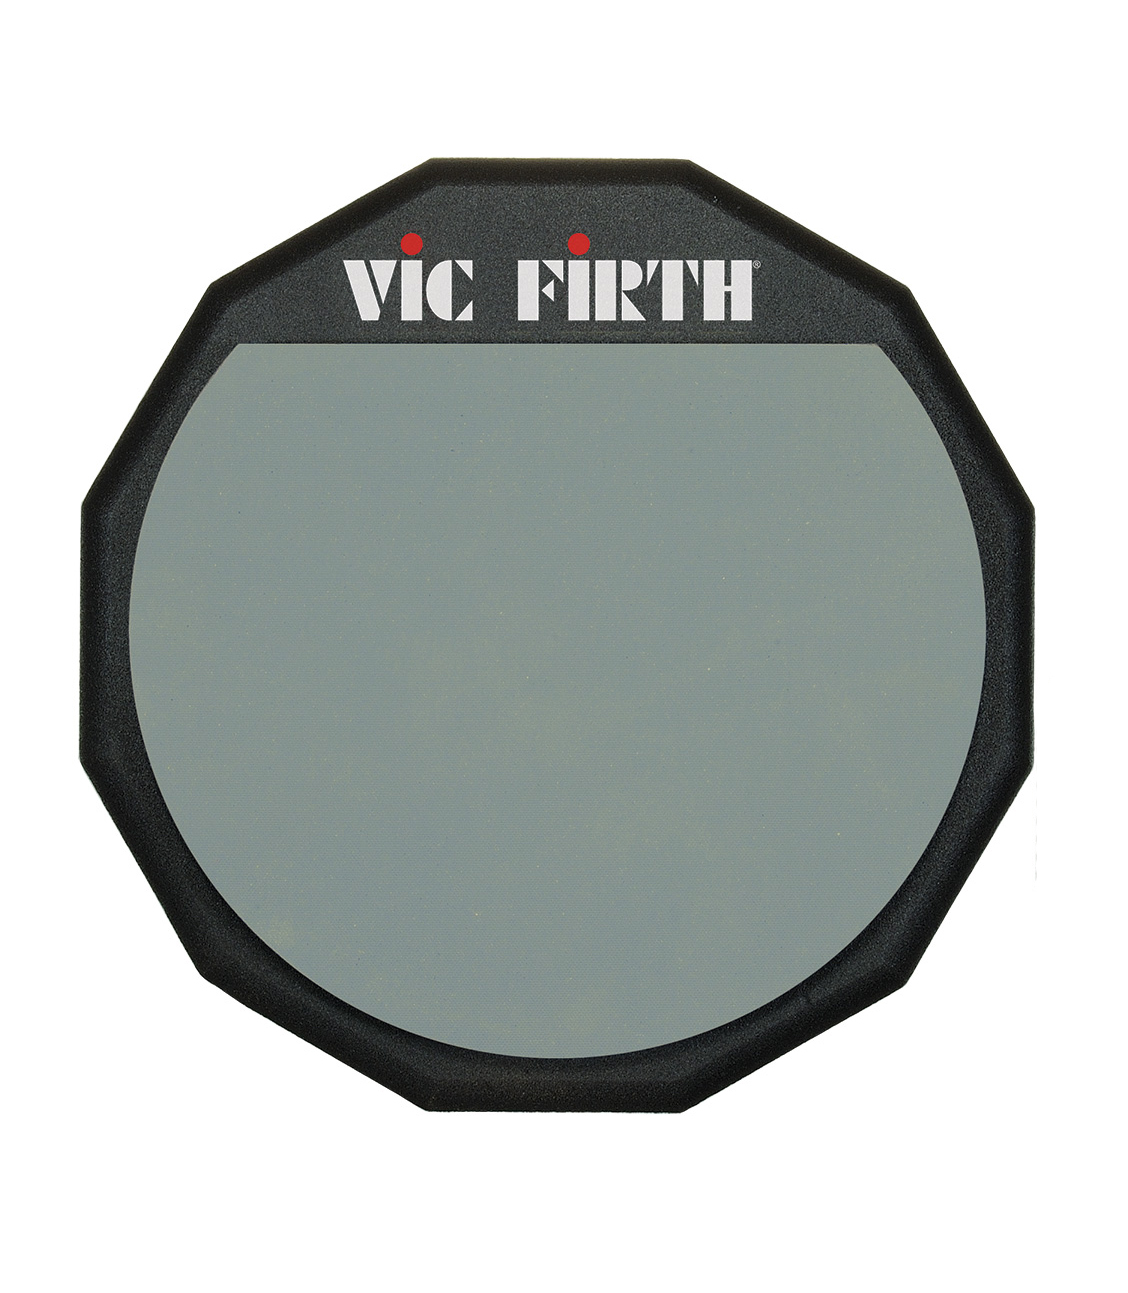 Vicfirth - 6 Inch Single Sided Practice Pad